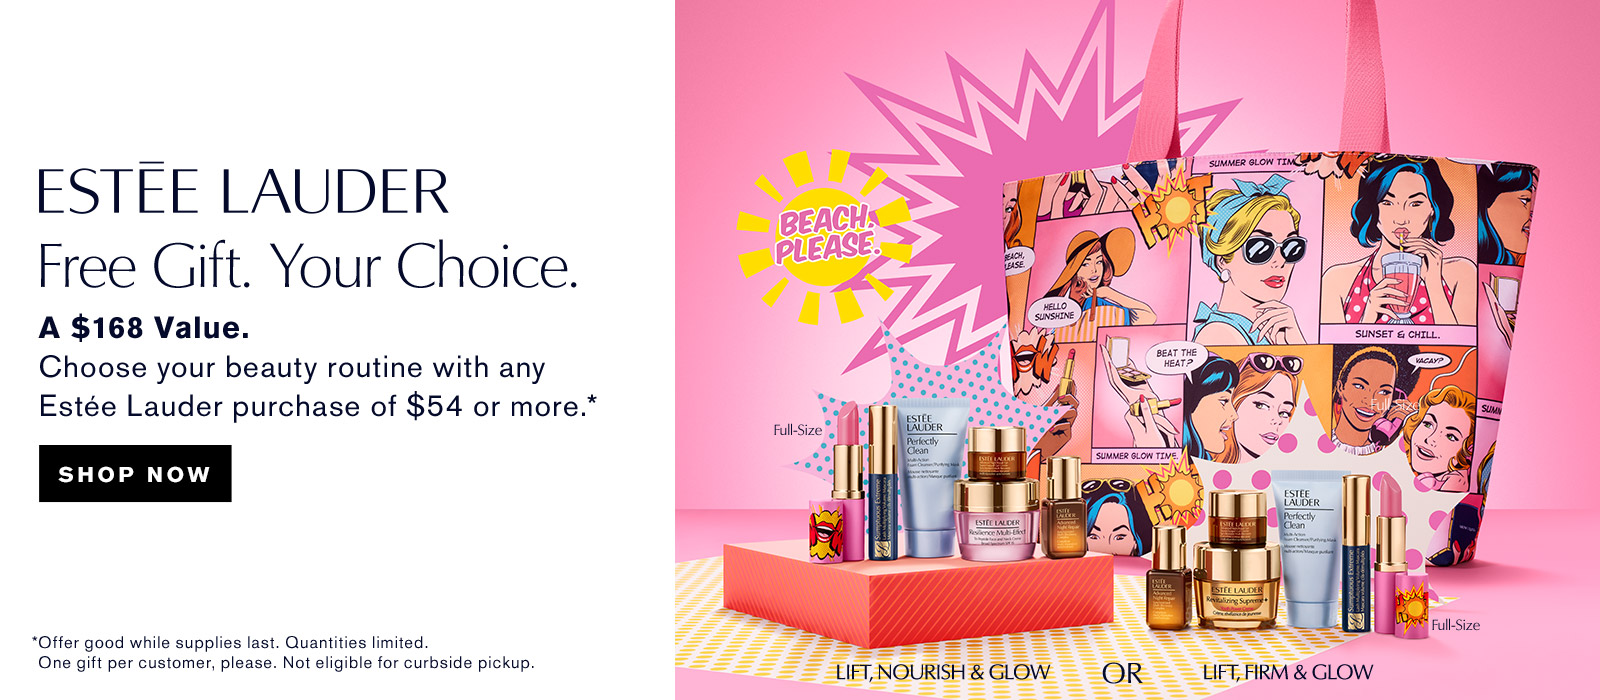 Free Gift - Your Choice! Choose your beauty routine with any Estee Lauder purchase of $54 or more.